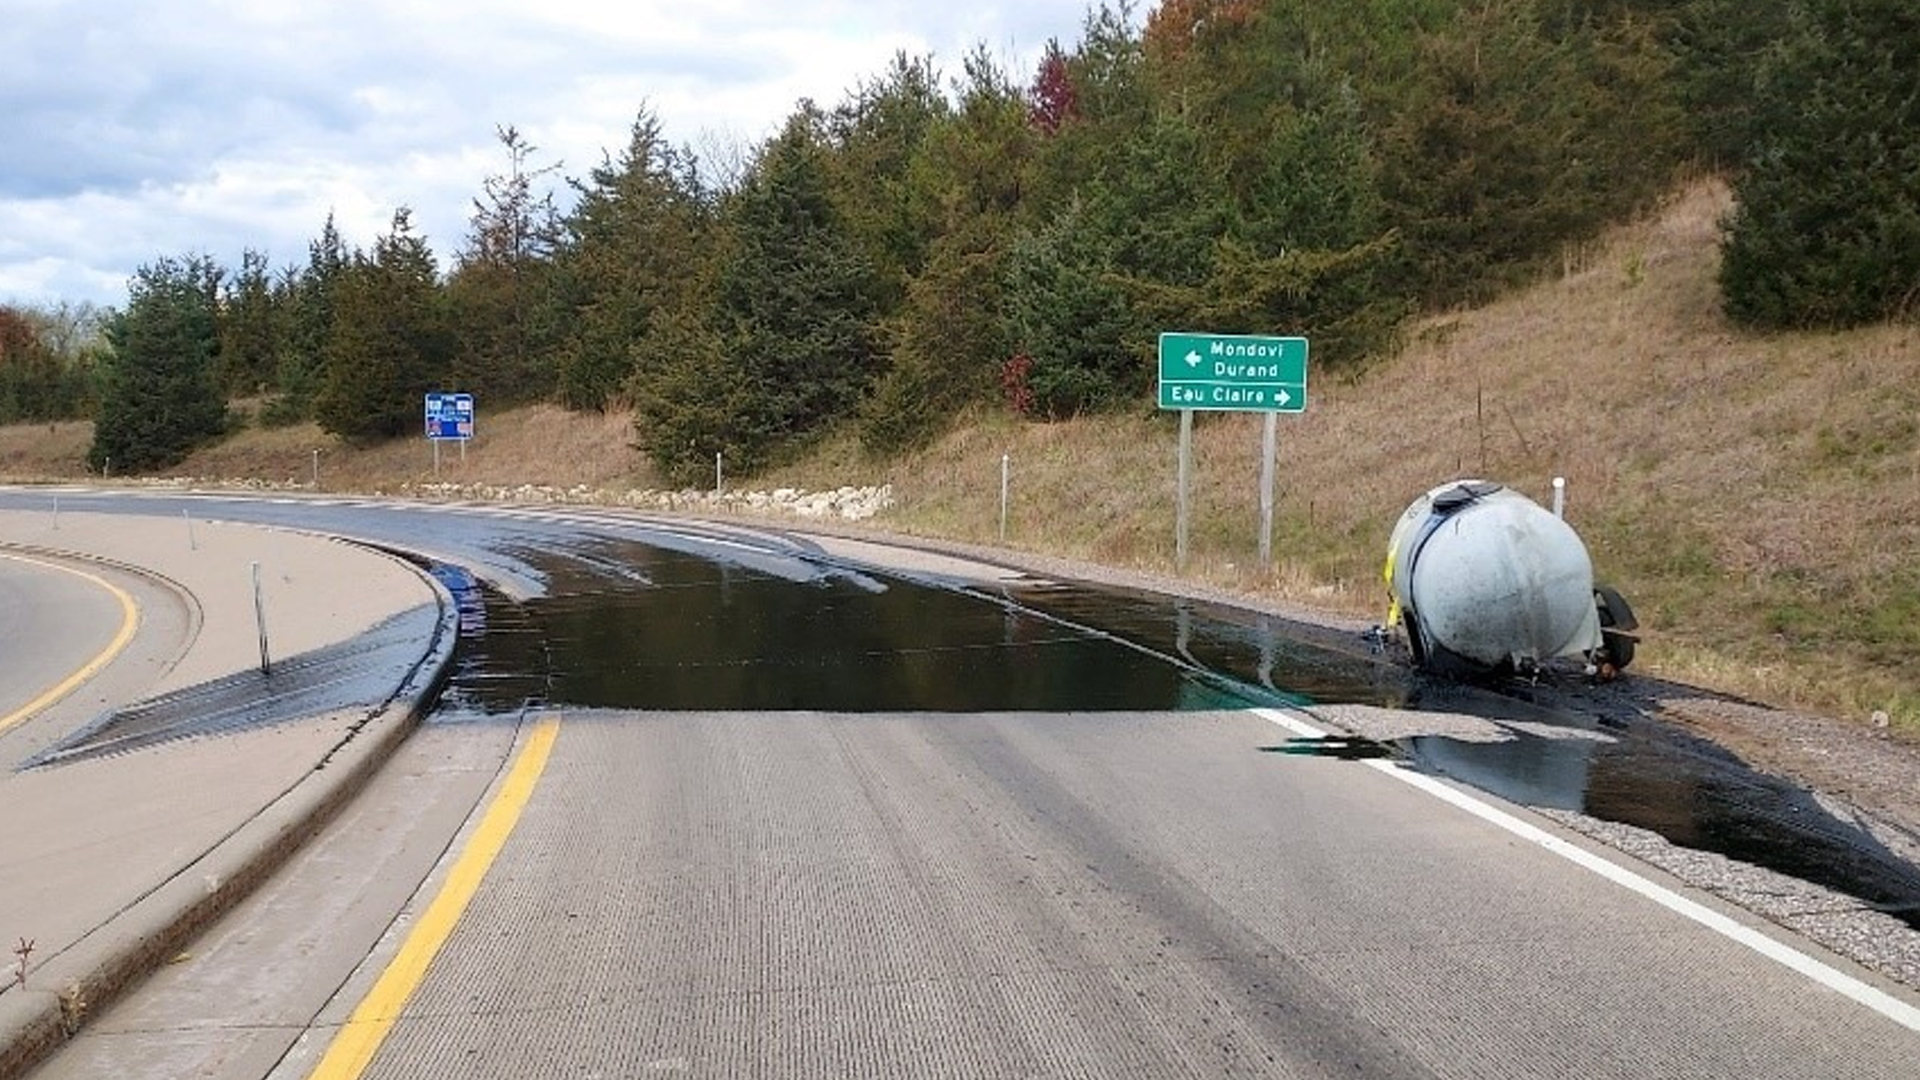 PSA: Don't Haul 330 Gallons of Oil With a Janky Homemade Trailer